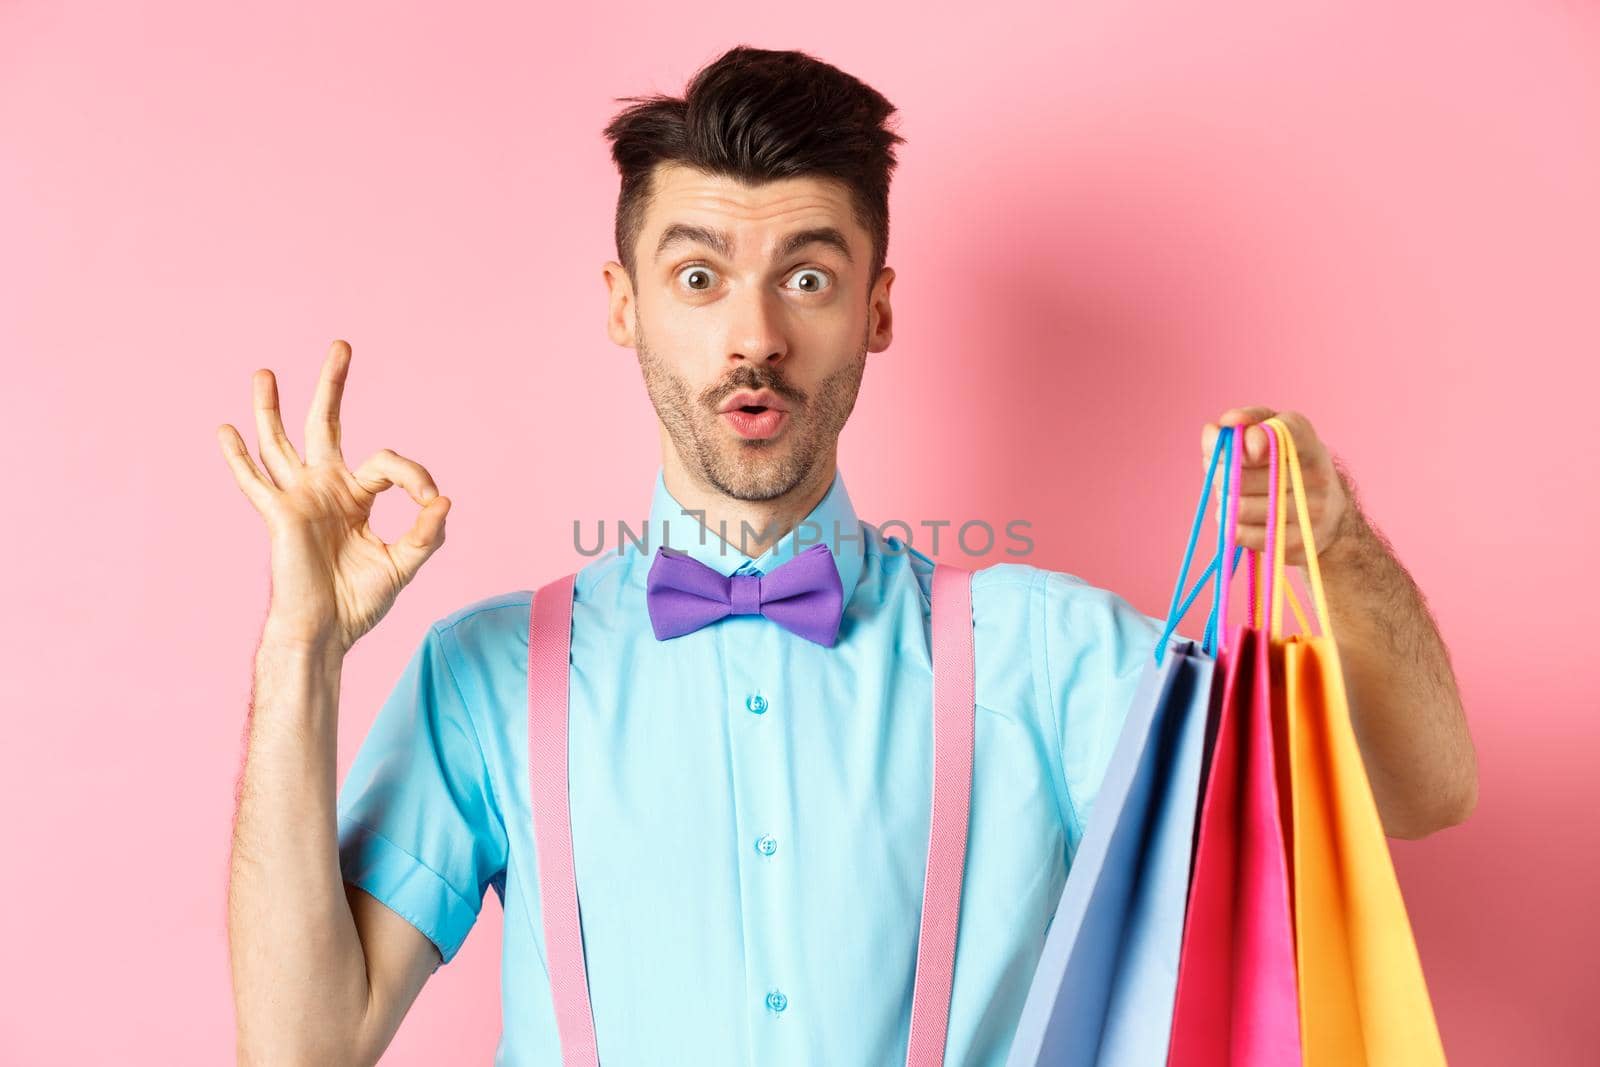 Funny guy in bow-tie showing OK sign and shopping bags, praising good deal in shops, standing over pink background.